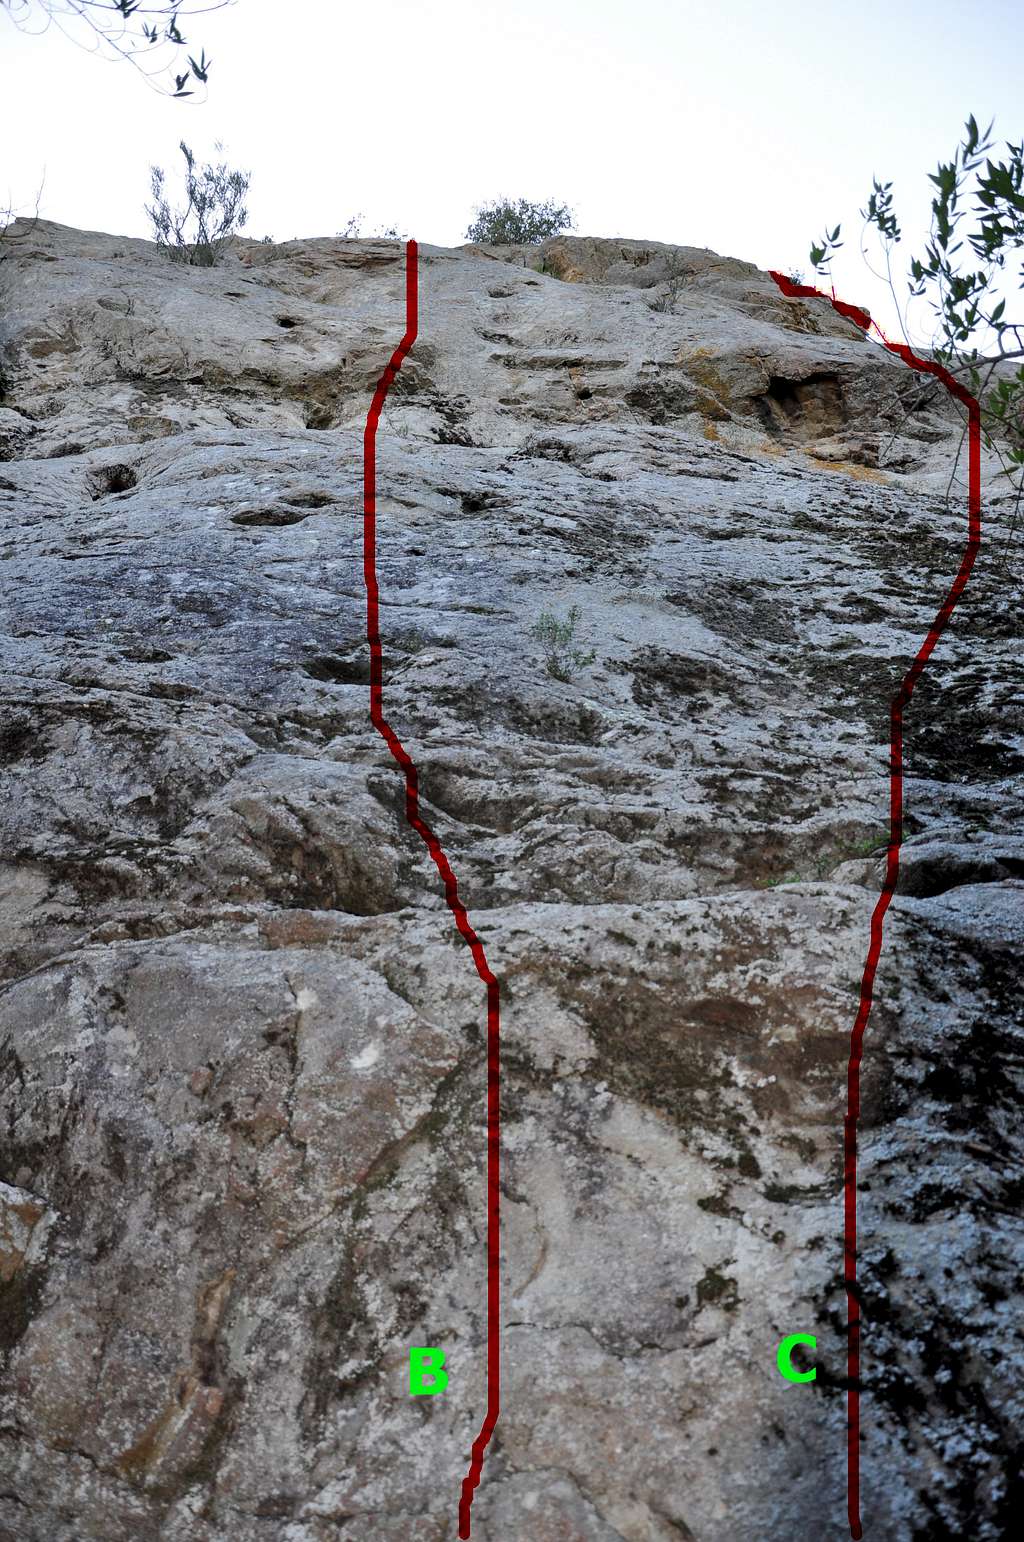 Climbs of the mid-face